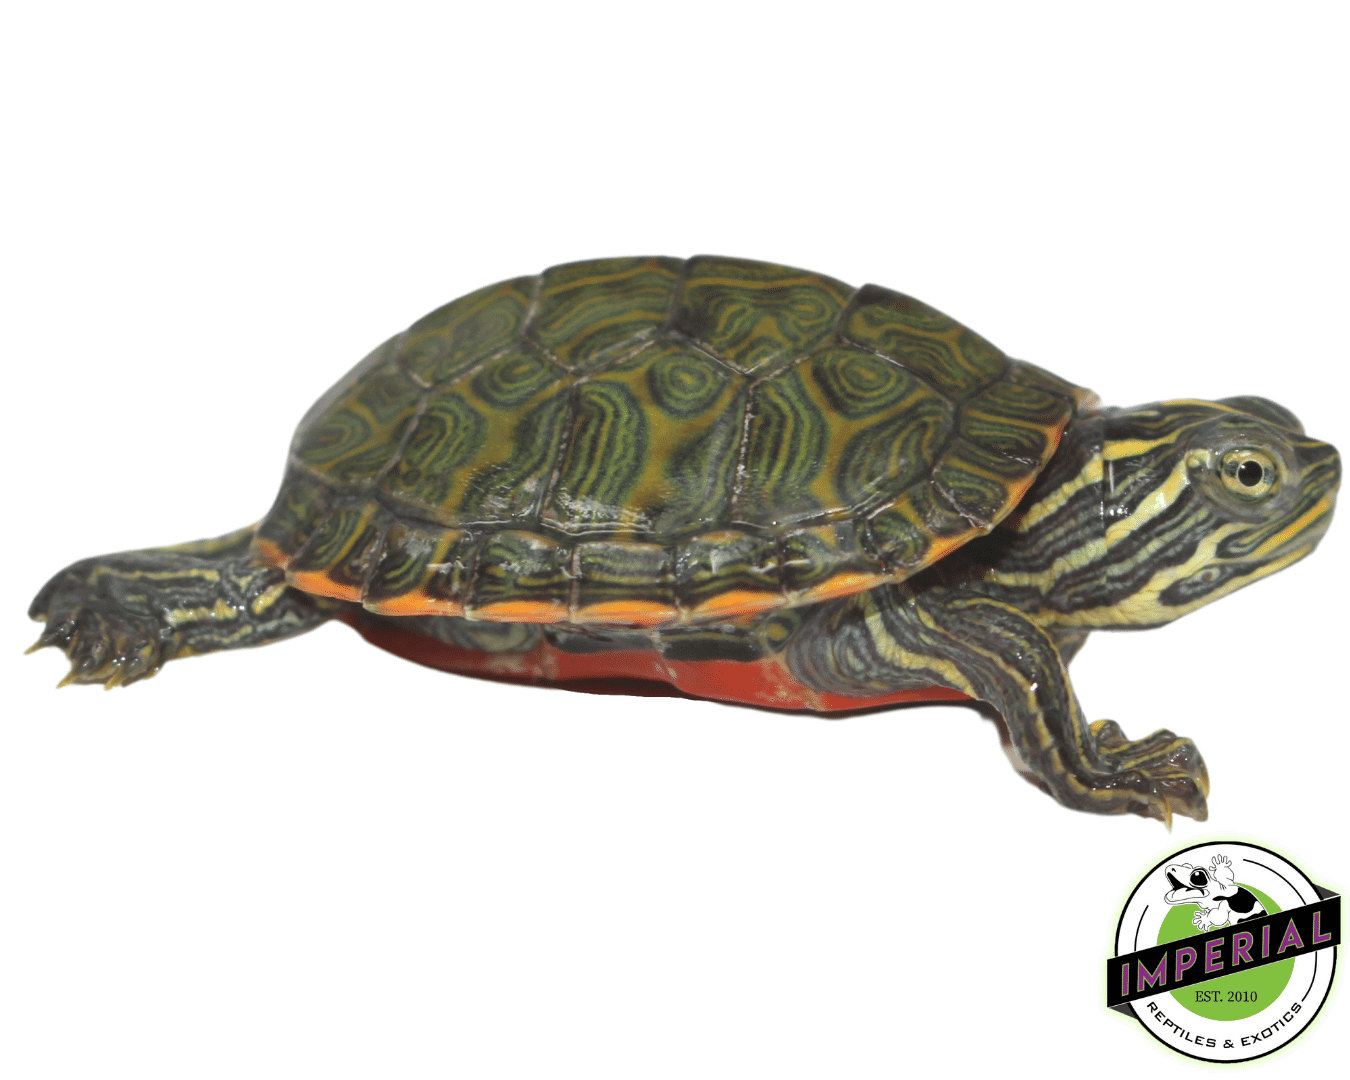 Northern Red Belly cooter turtle for sale, buy reptiles online